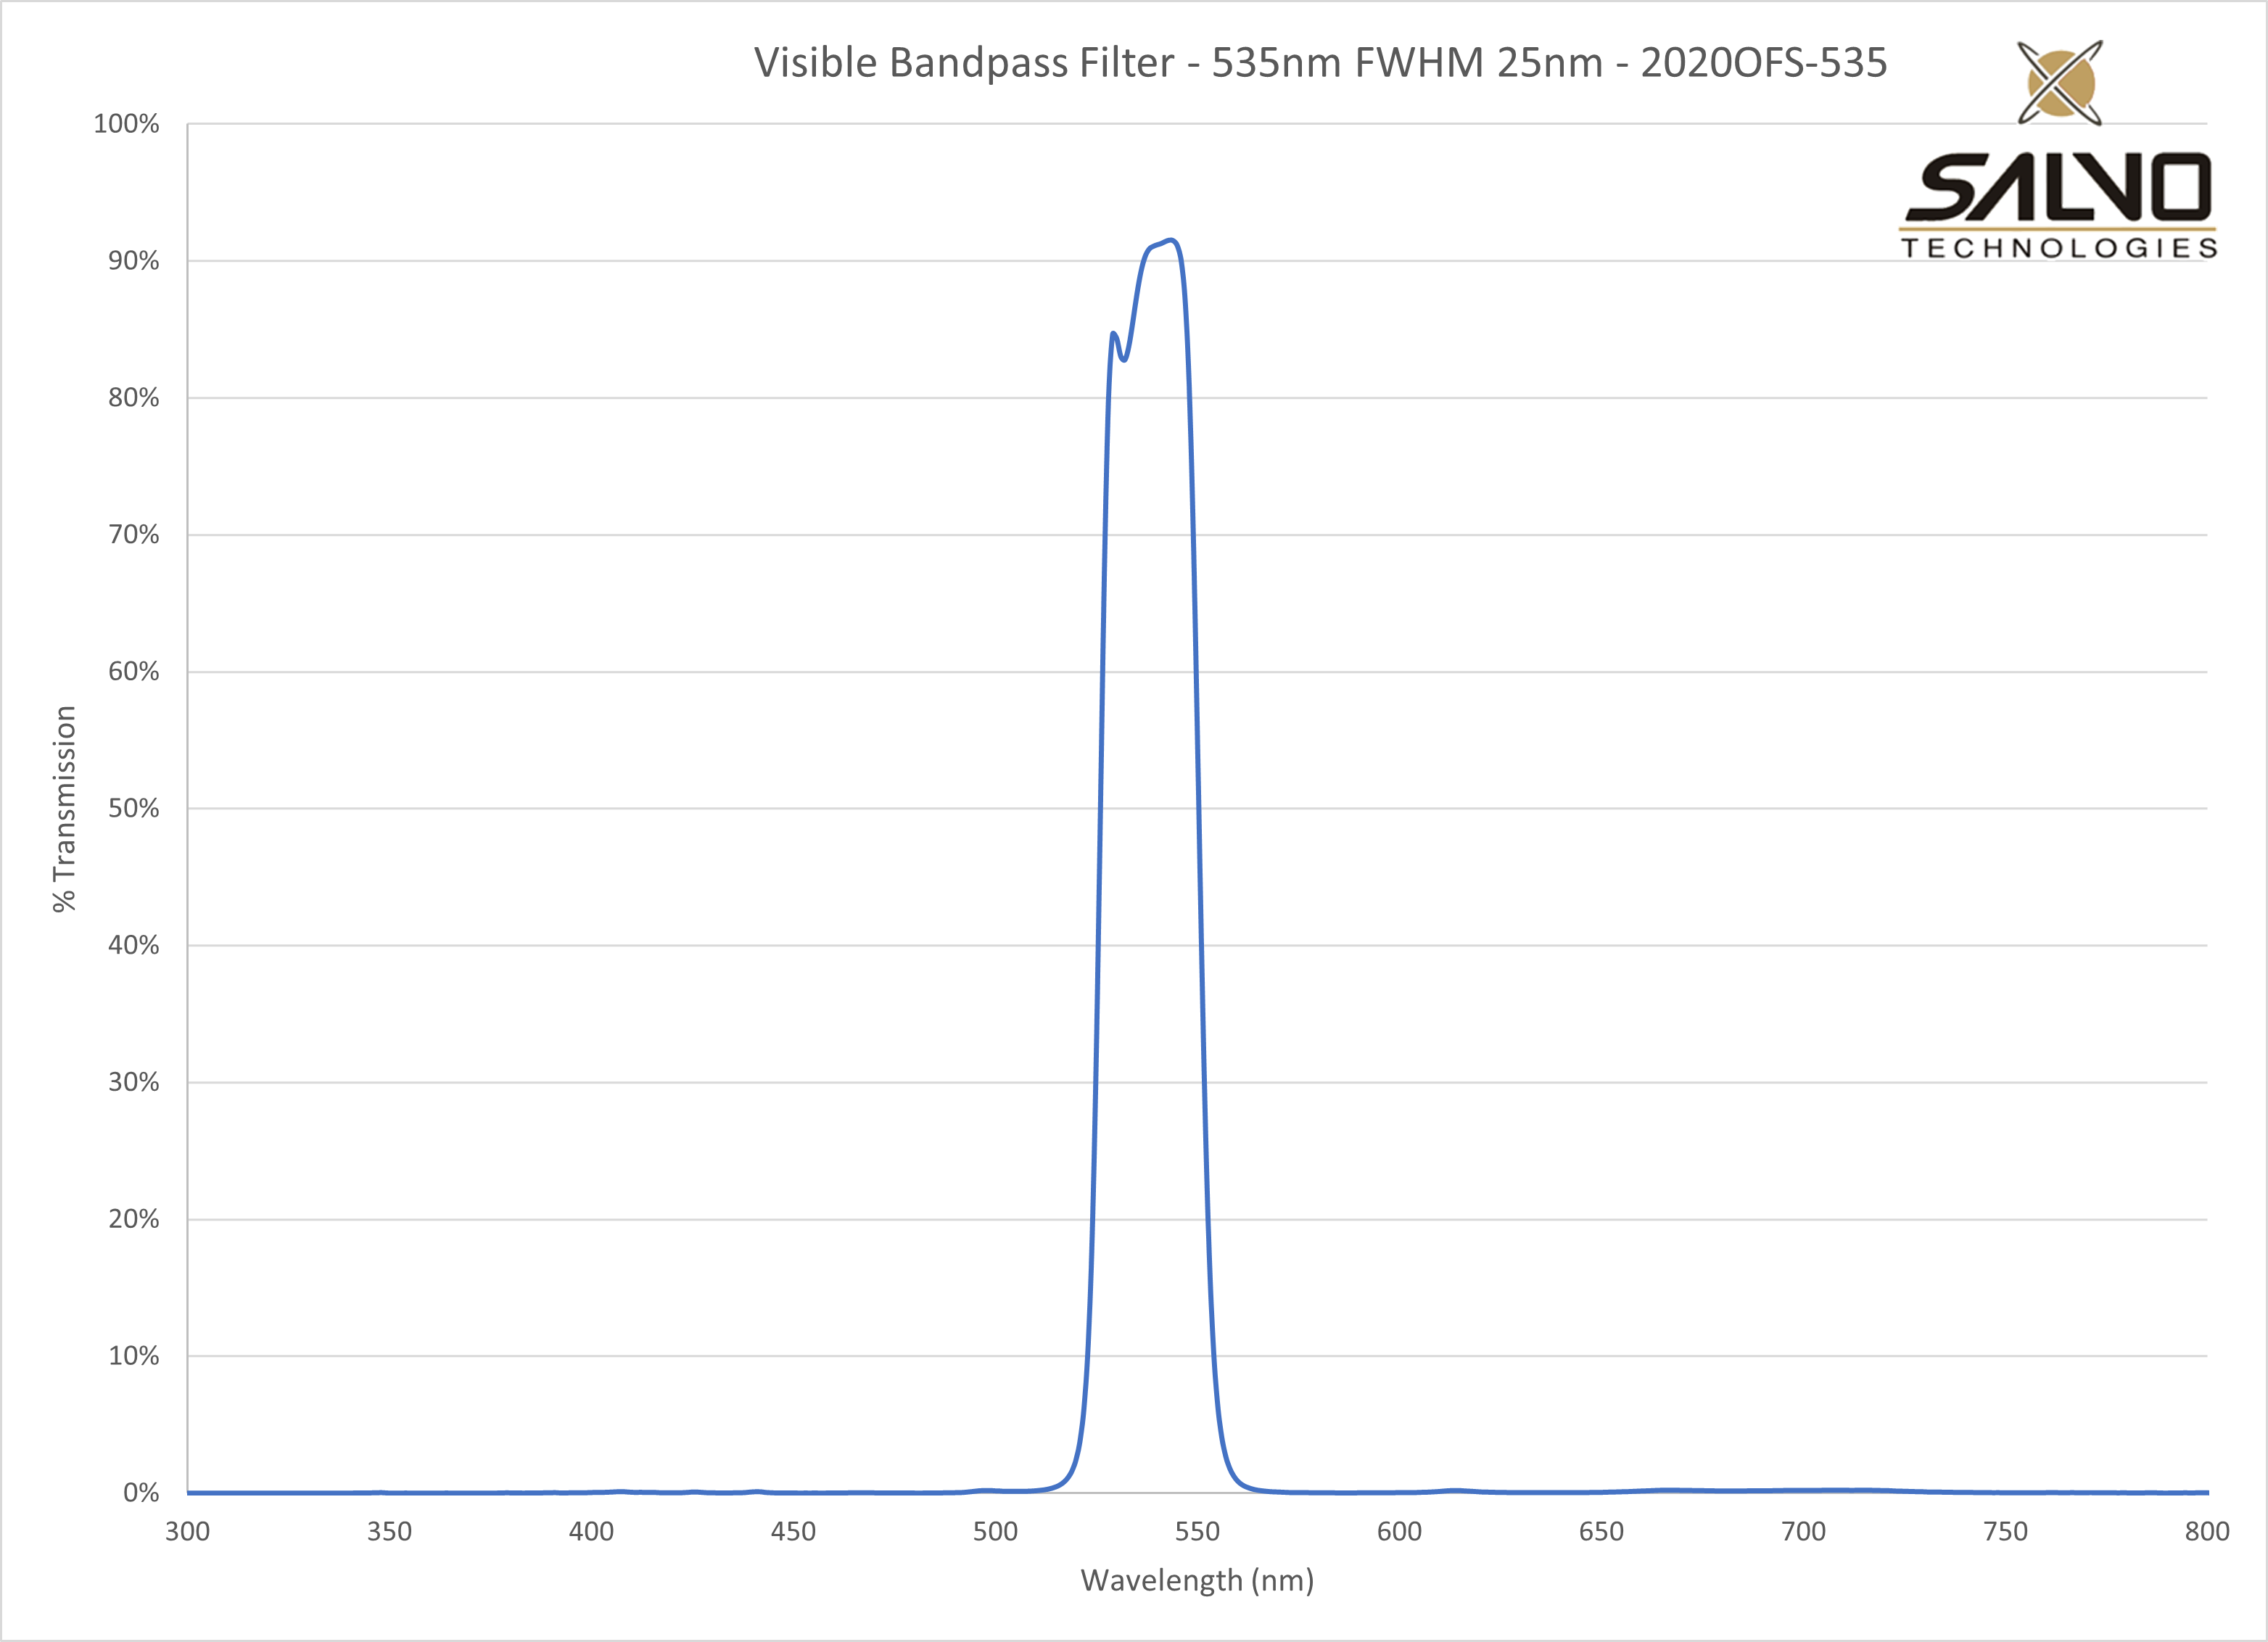 Visible Bandpass Filter - 535nm FWHM 25nm - 2020OFS-535